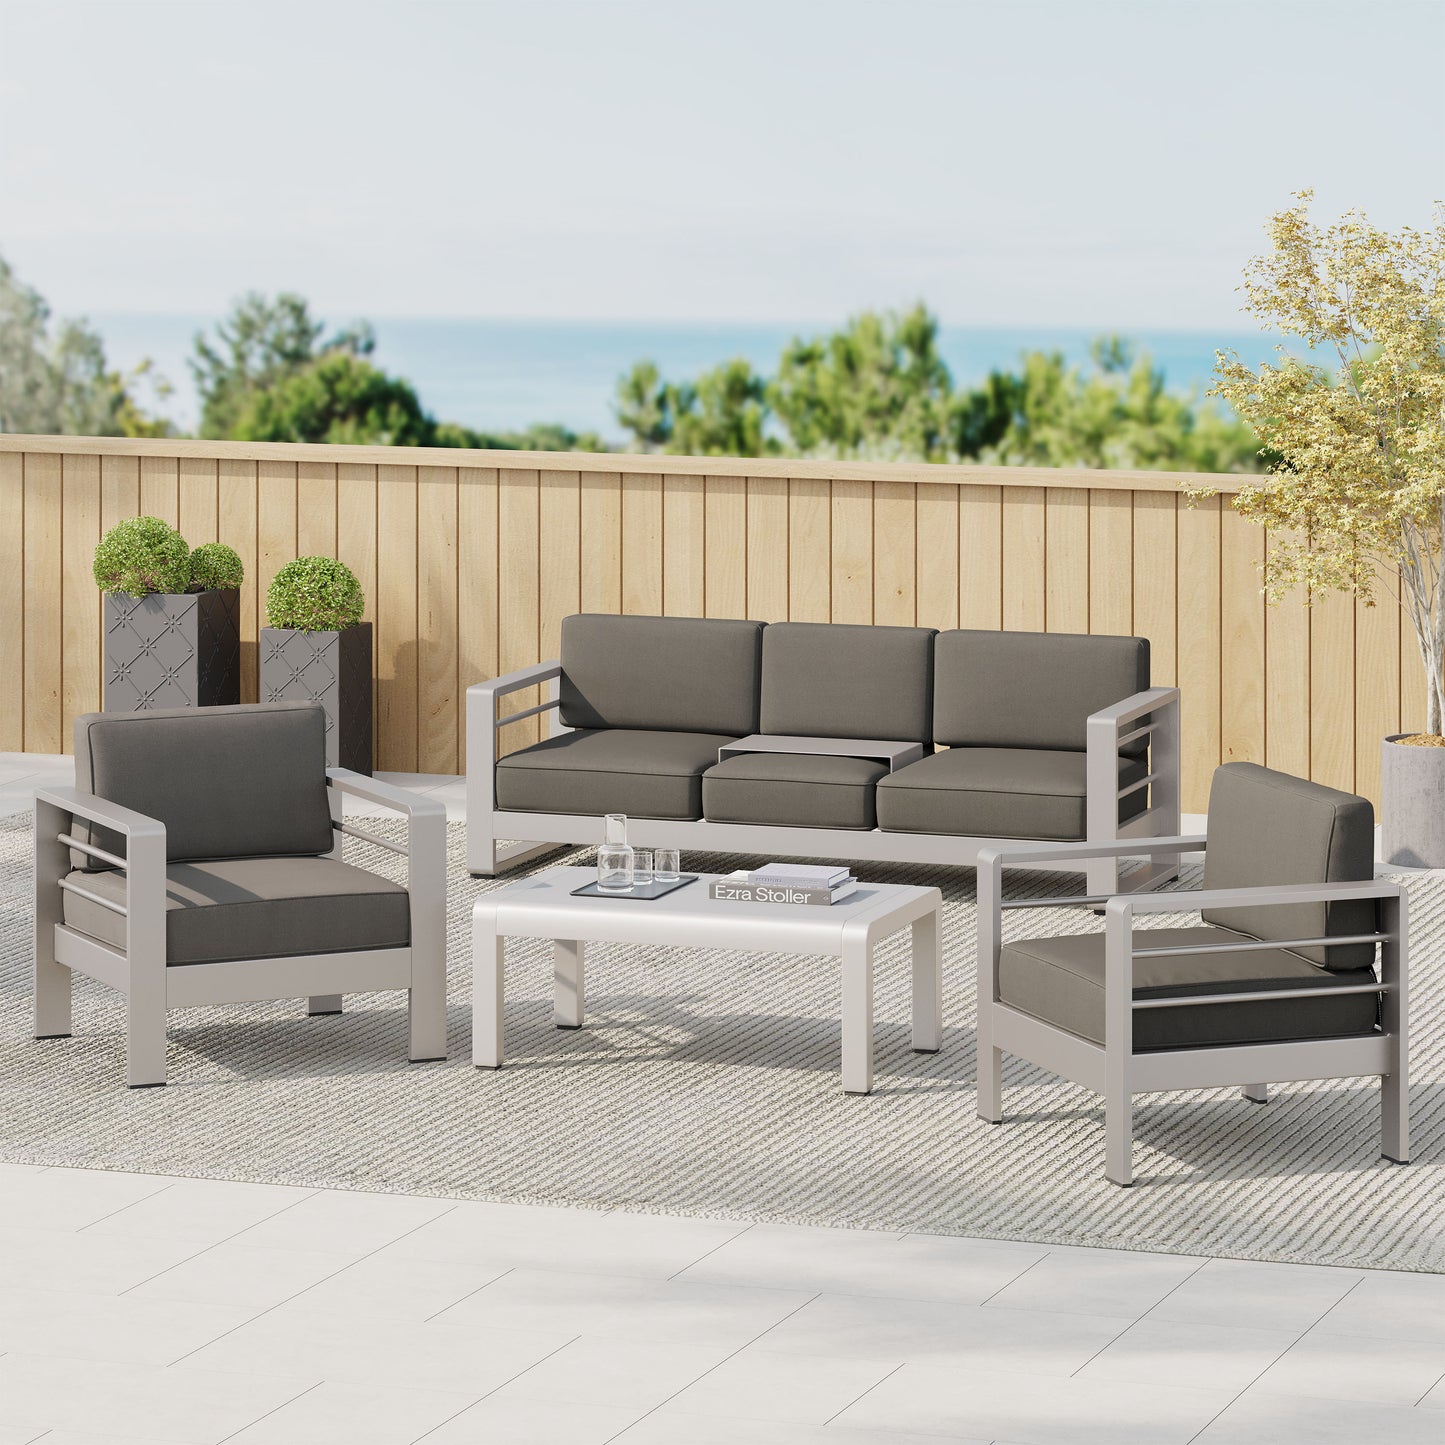 Coral Bay Outdoor 4 Piece Aluminum Chat Set with Cushions